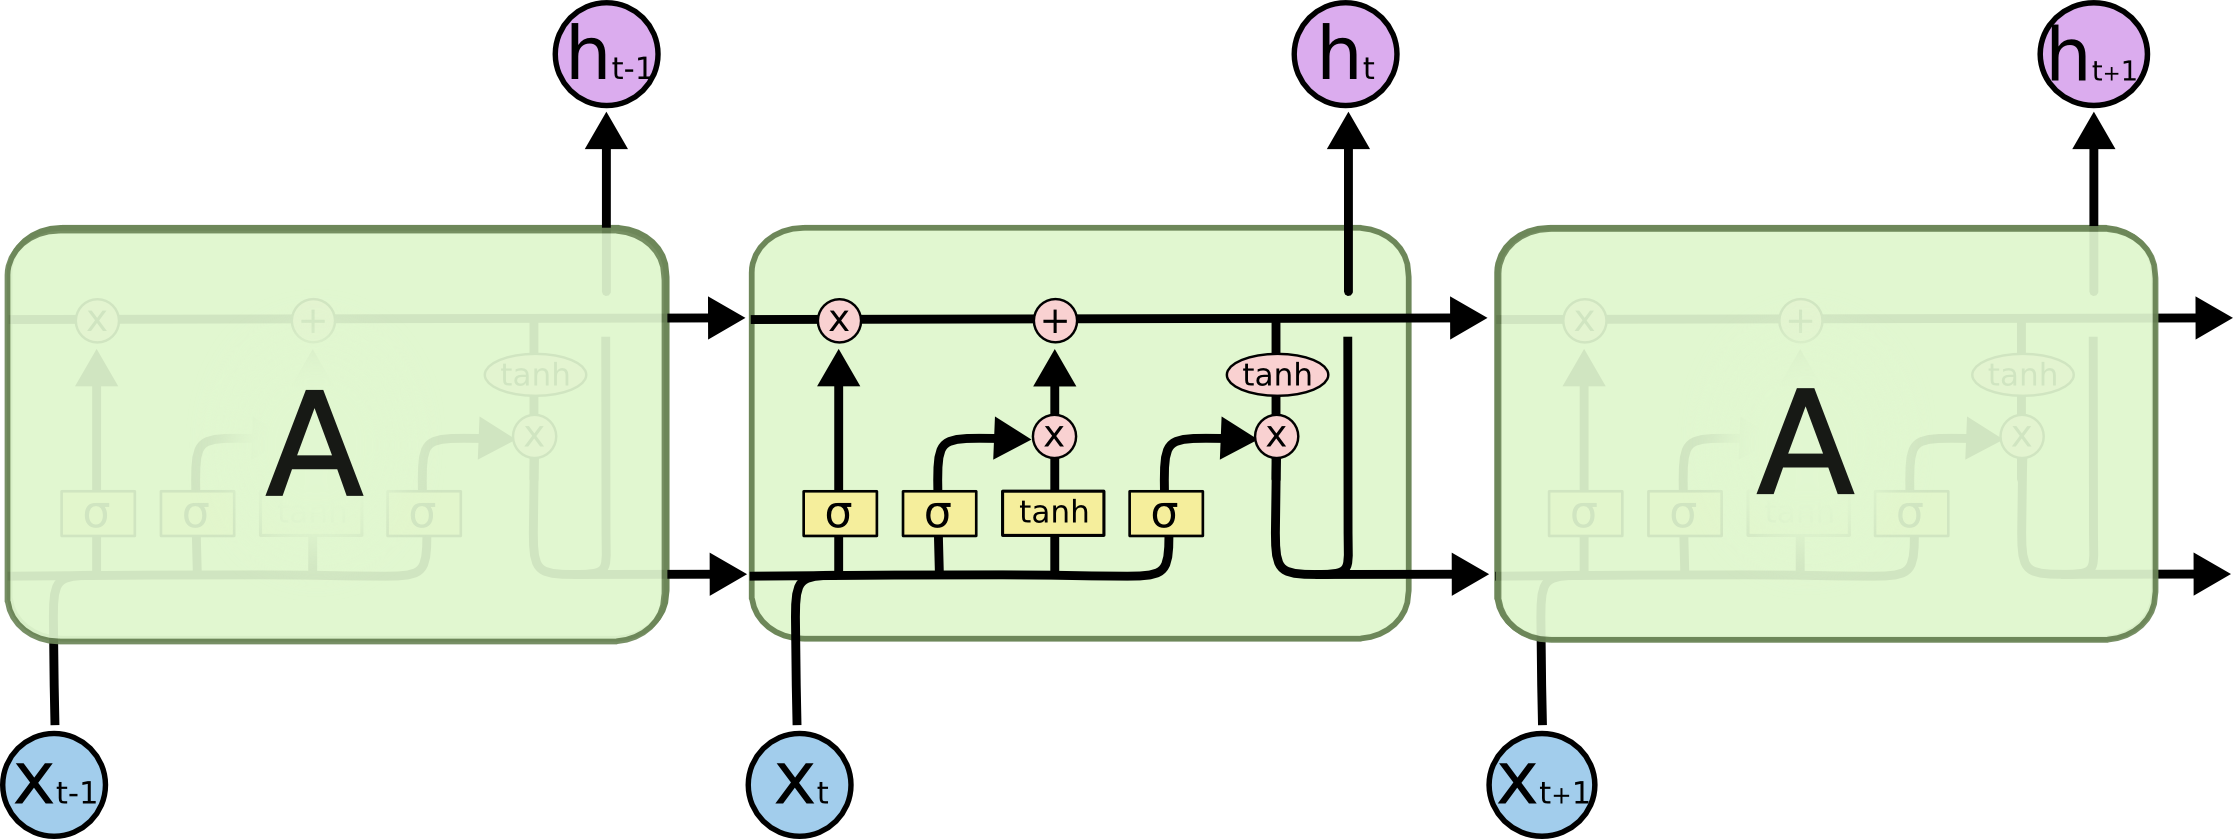 Image shows a diagram of a recurrent neural network with LSTM cells, with arrows depicting the flow of data from earlier time steps to later timesteps within the RNN.